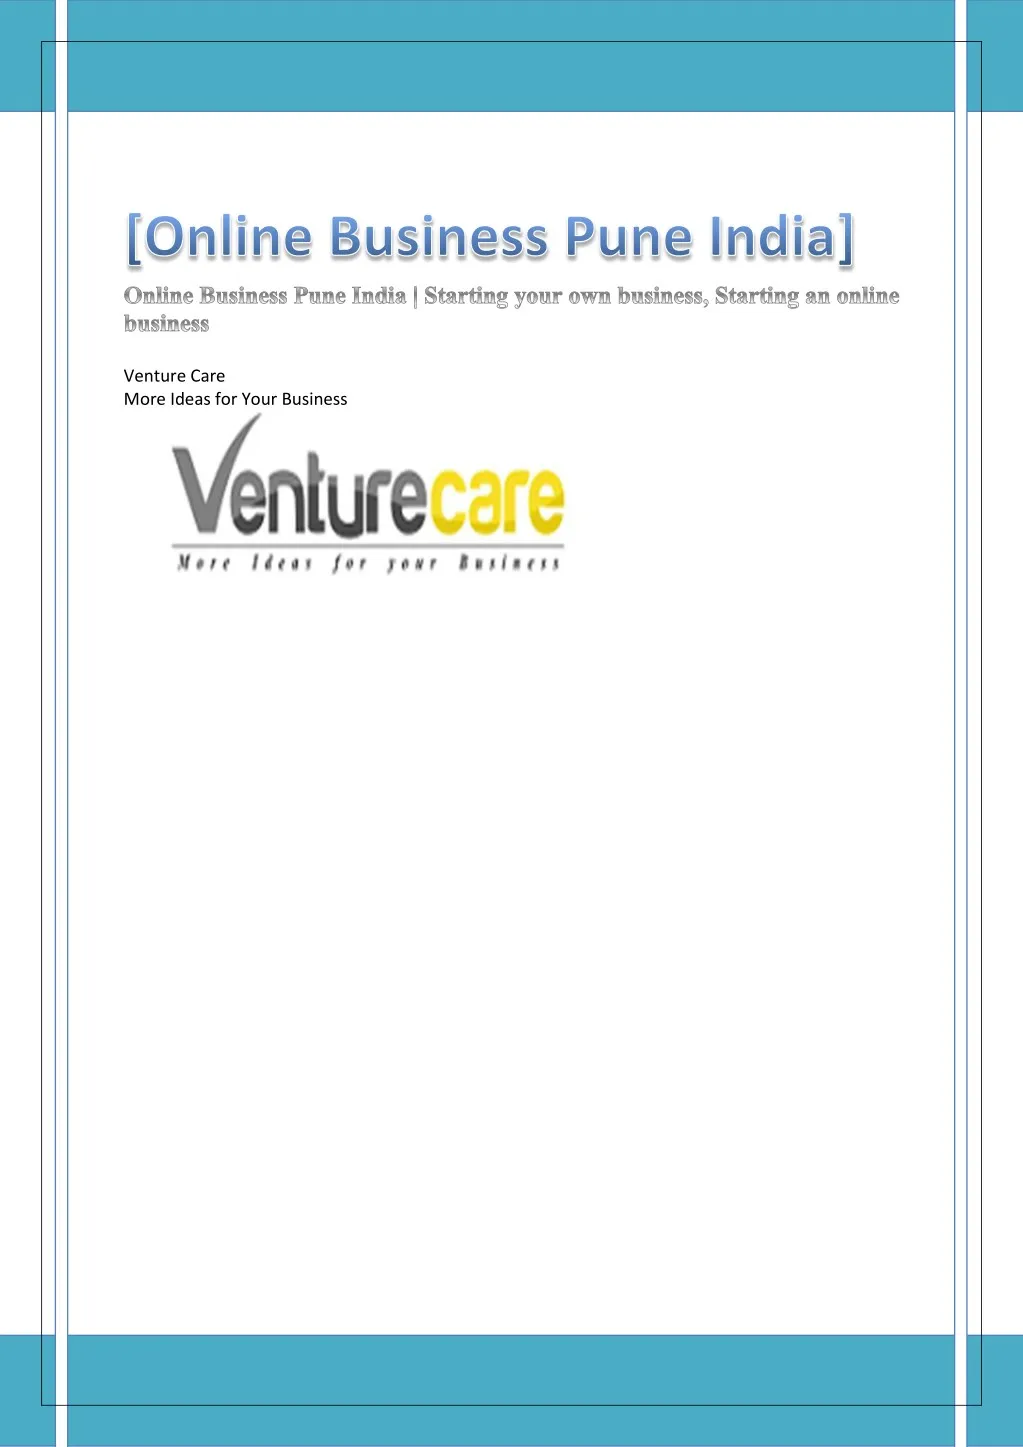 venture care more ideas for your business